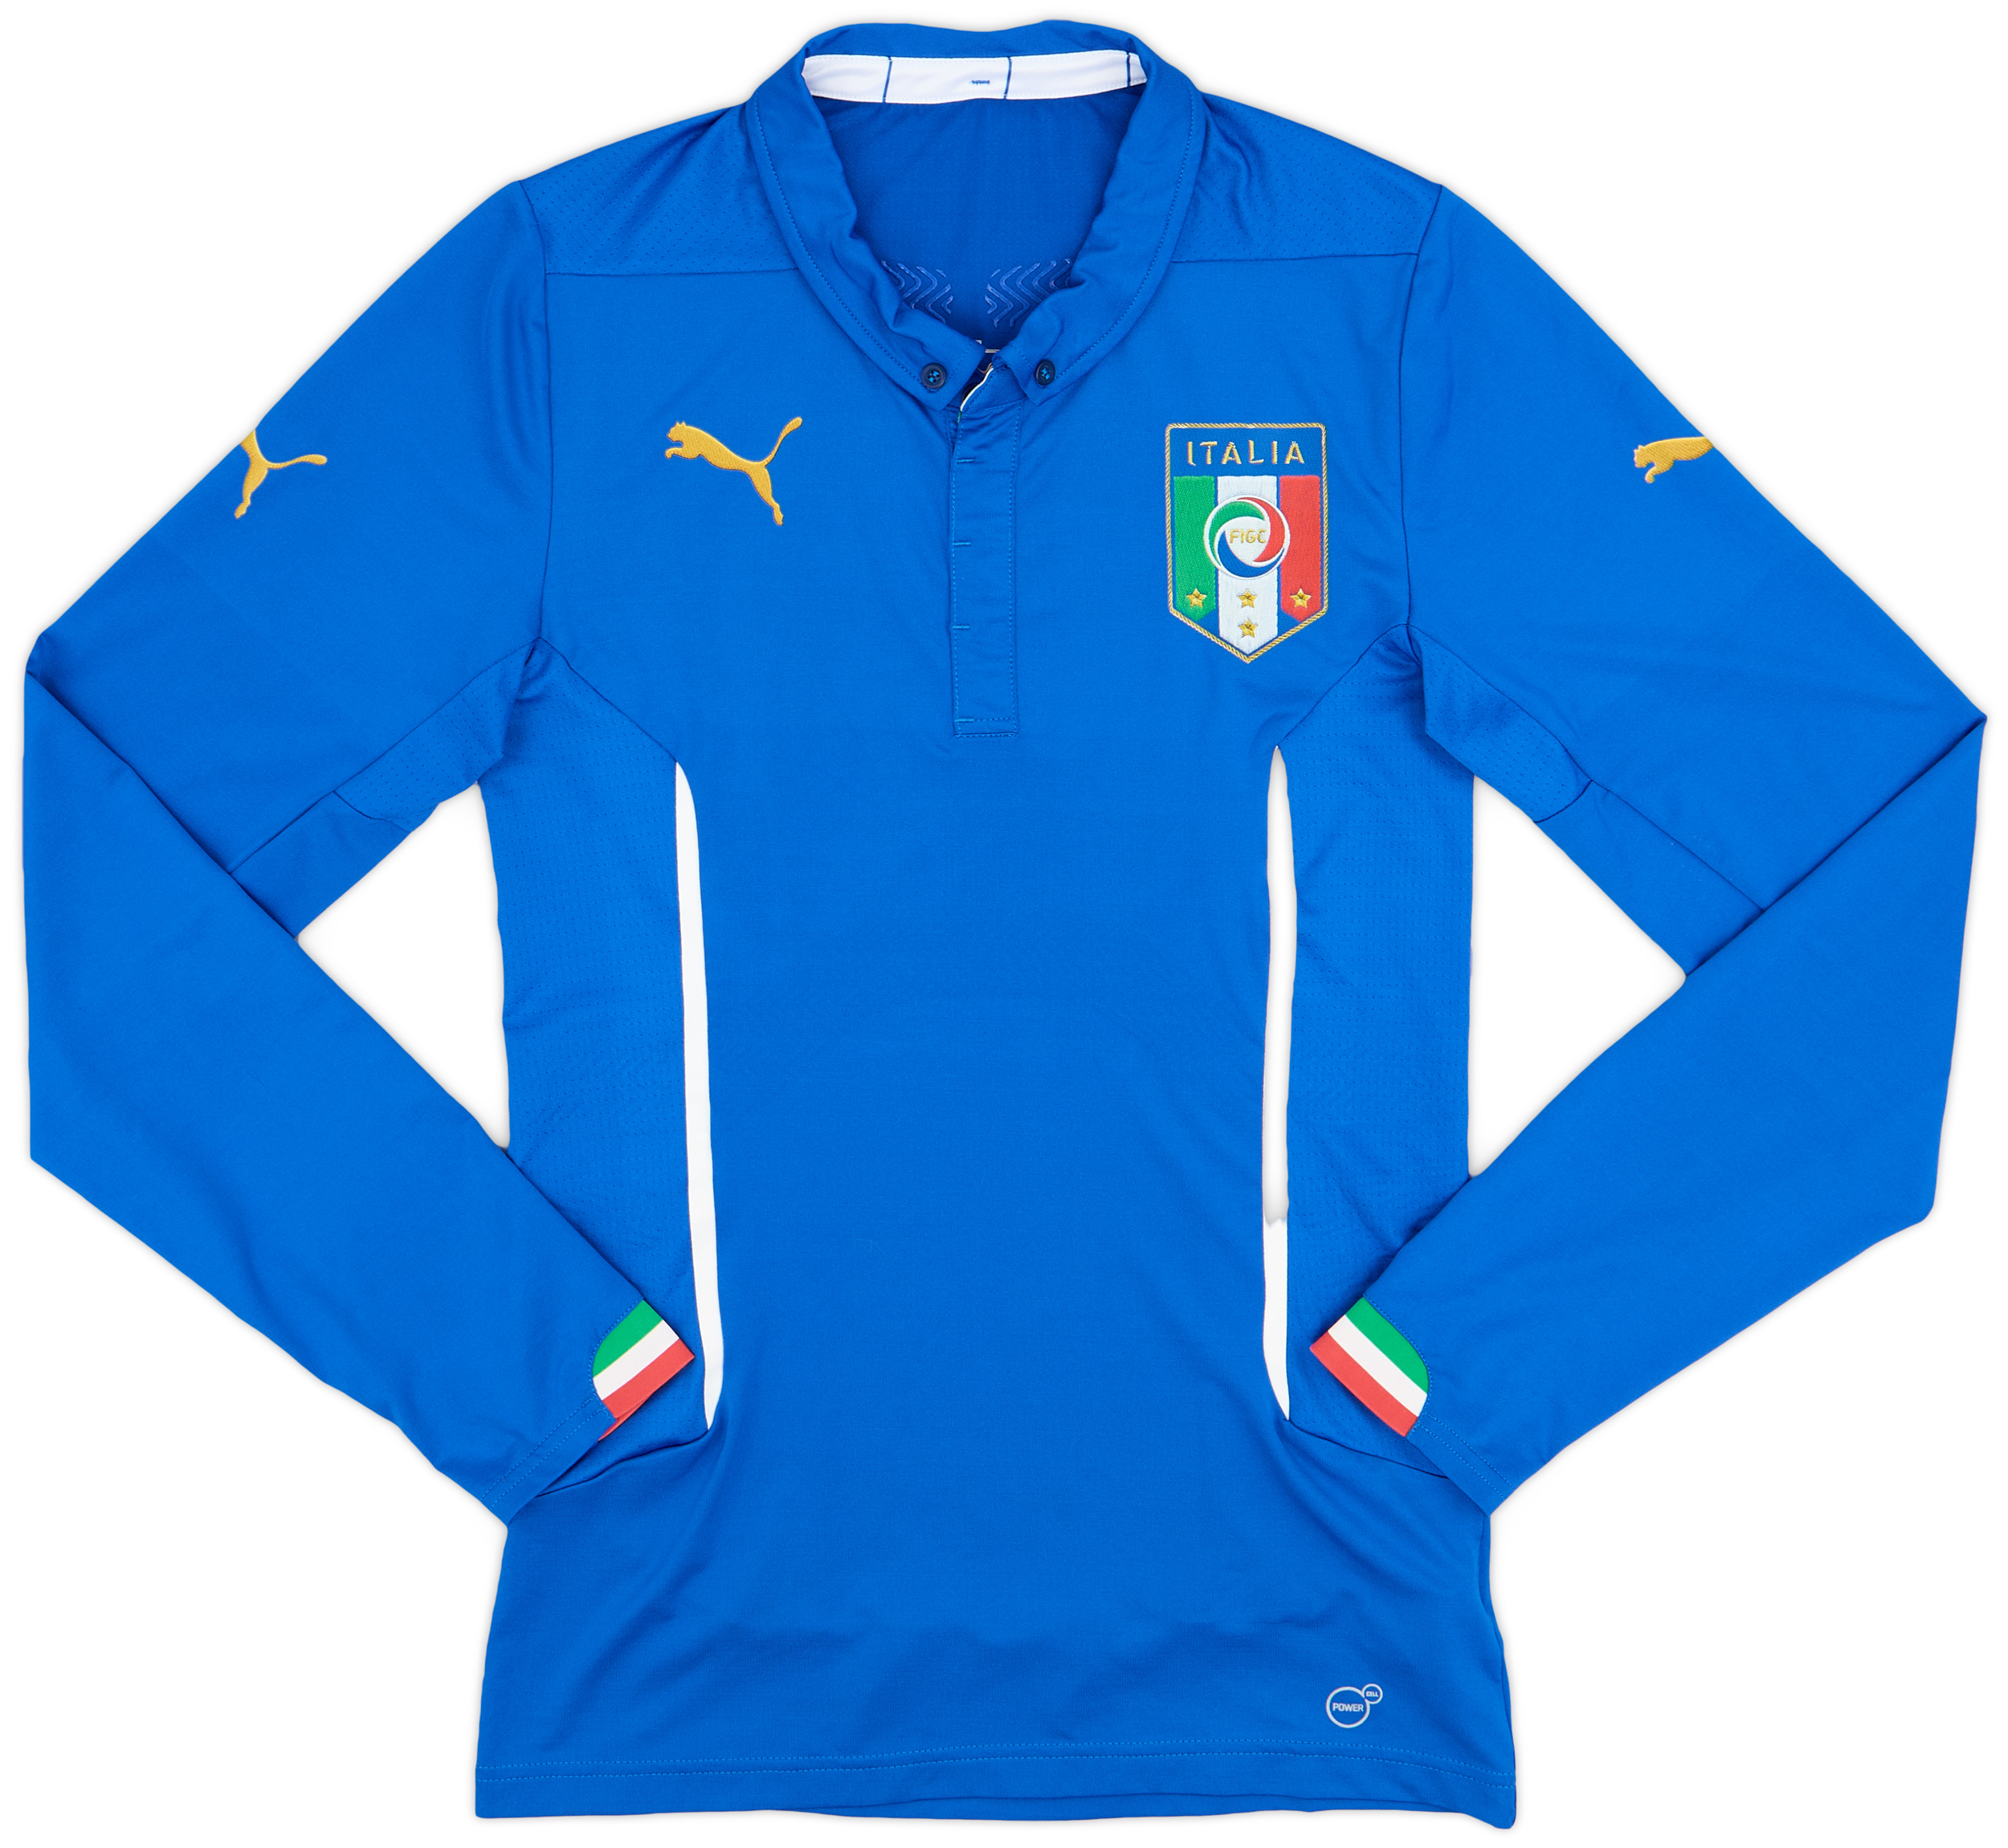 2014-15 Italy Player Issue Home Shirt - 10/10 - ()